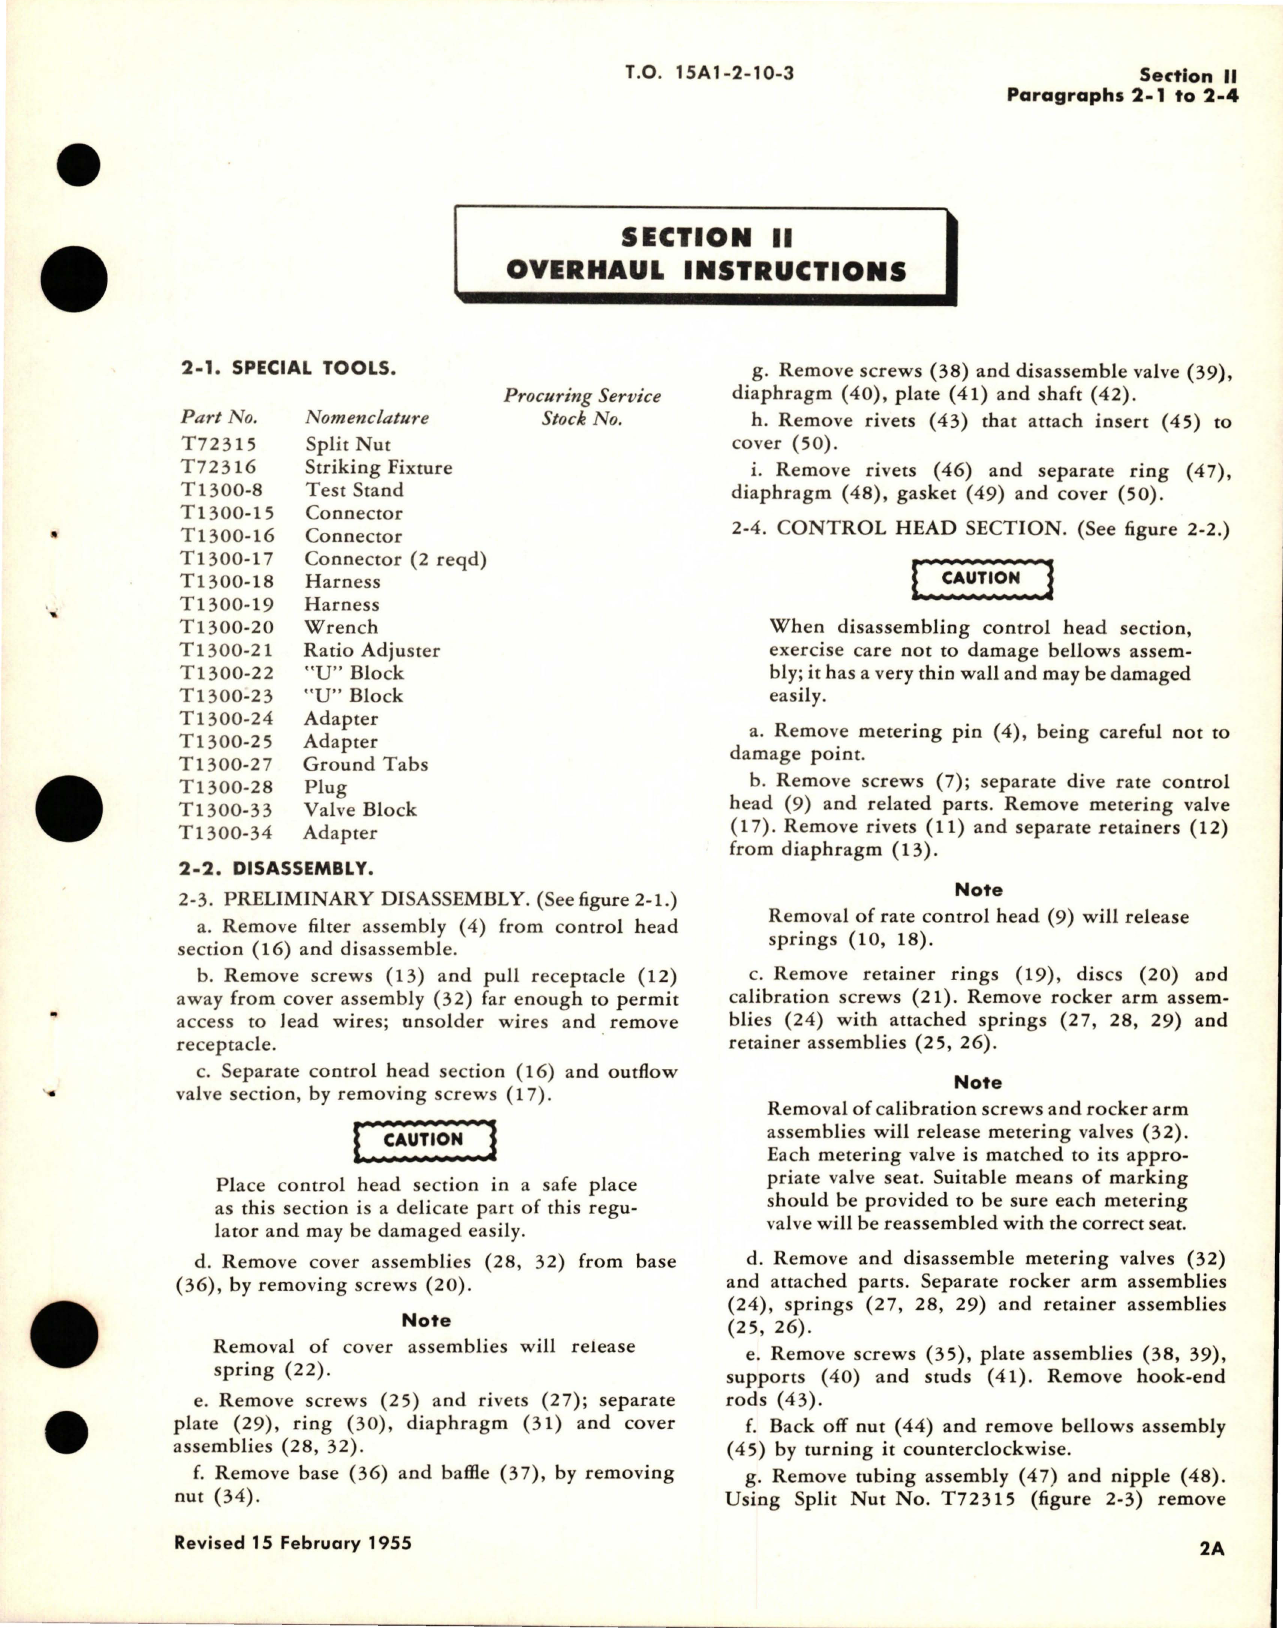 Sample page 5 from AirCorps Library document: Overhaul Instructions for Aircraft Cabin Air Pressure Regulators